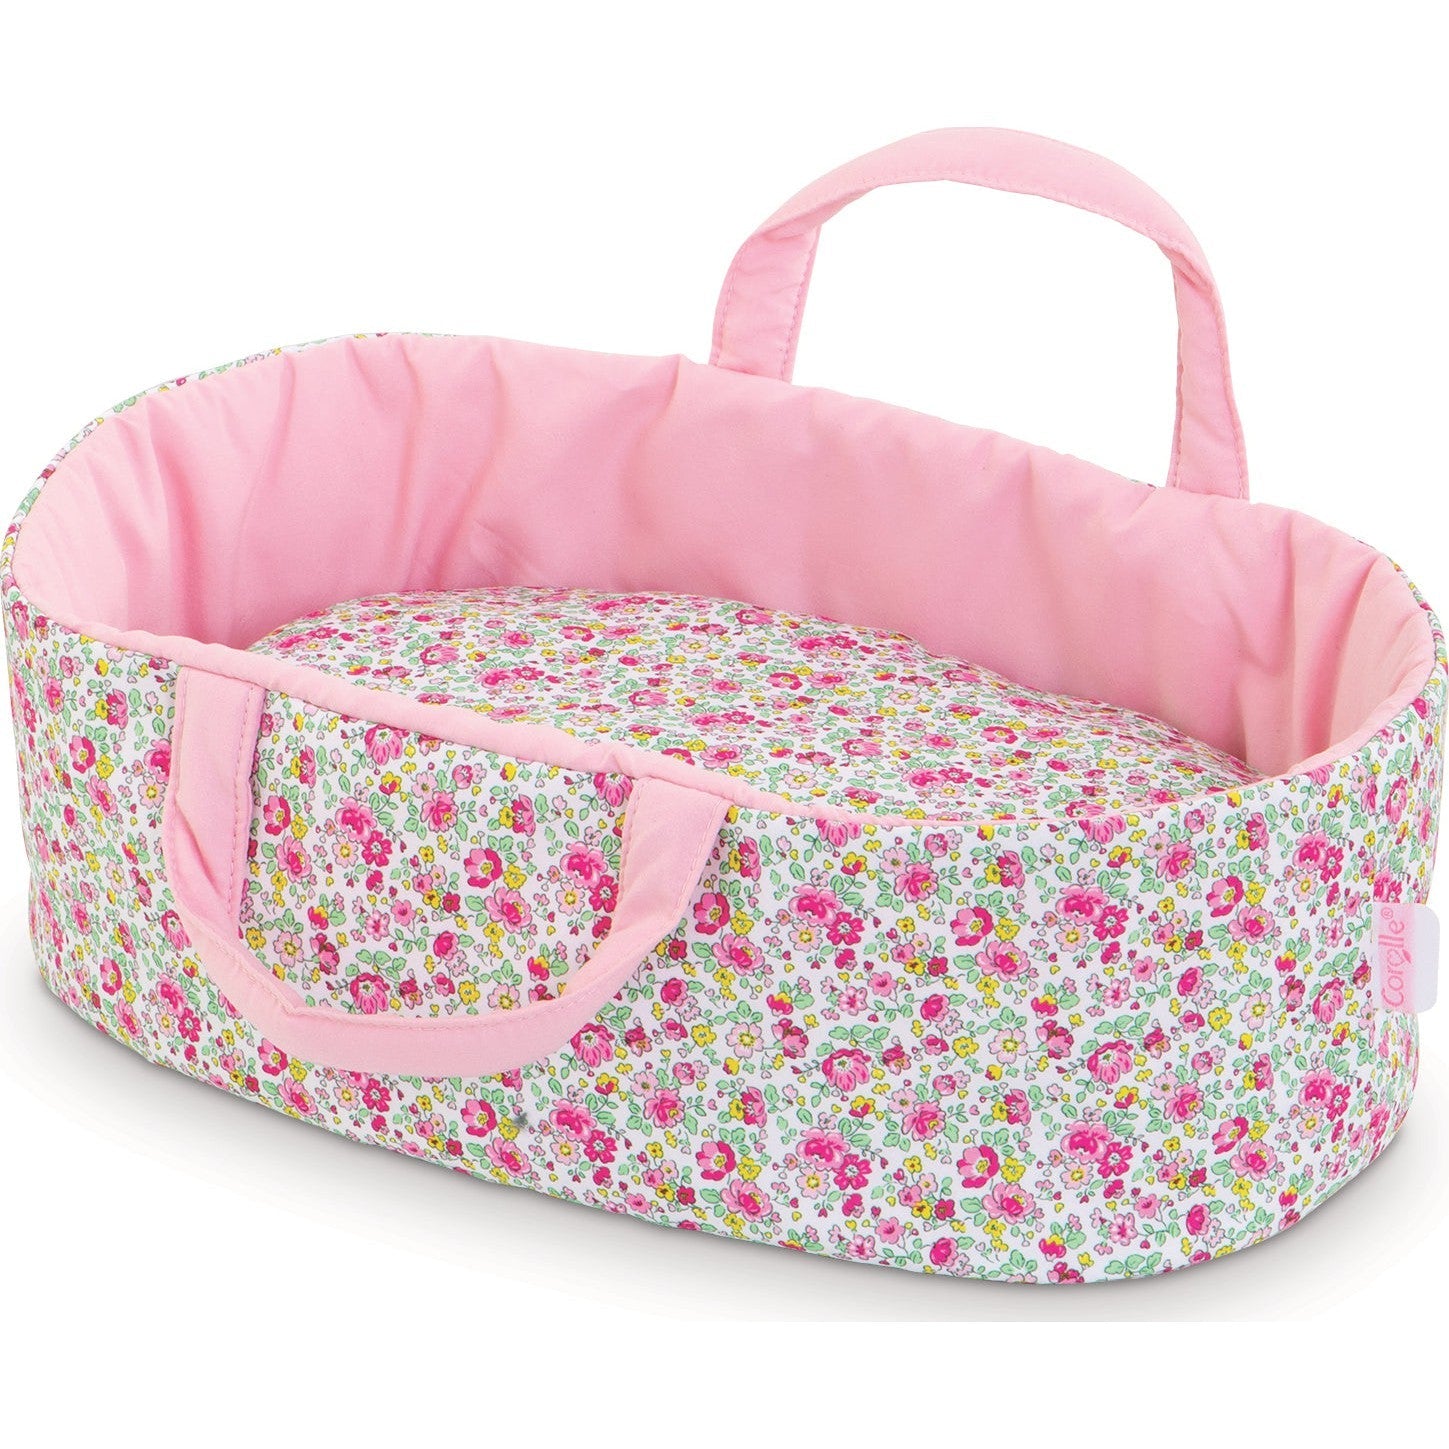 Corolle Floral 12" Carry Bed-COROLLE-Little Giant Kidz